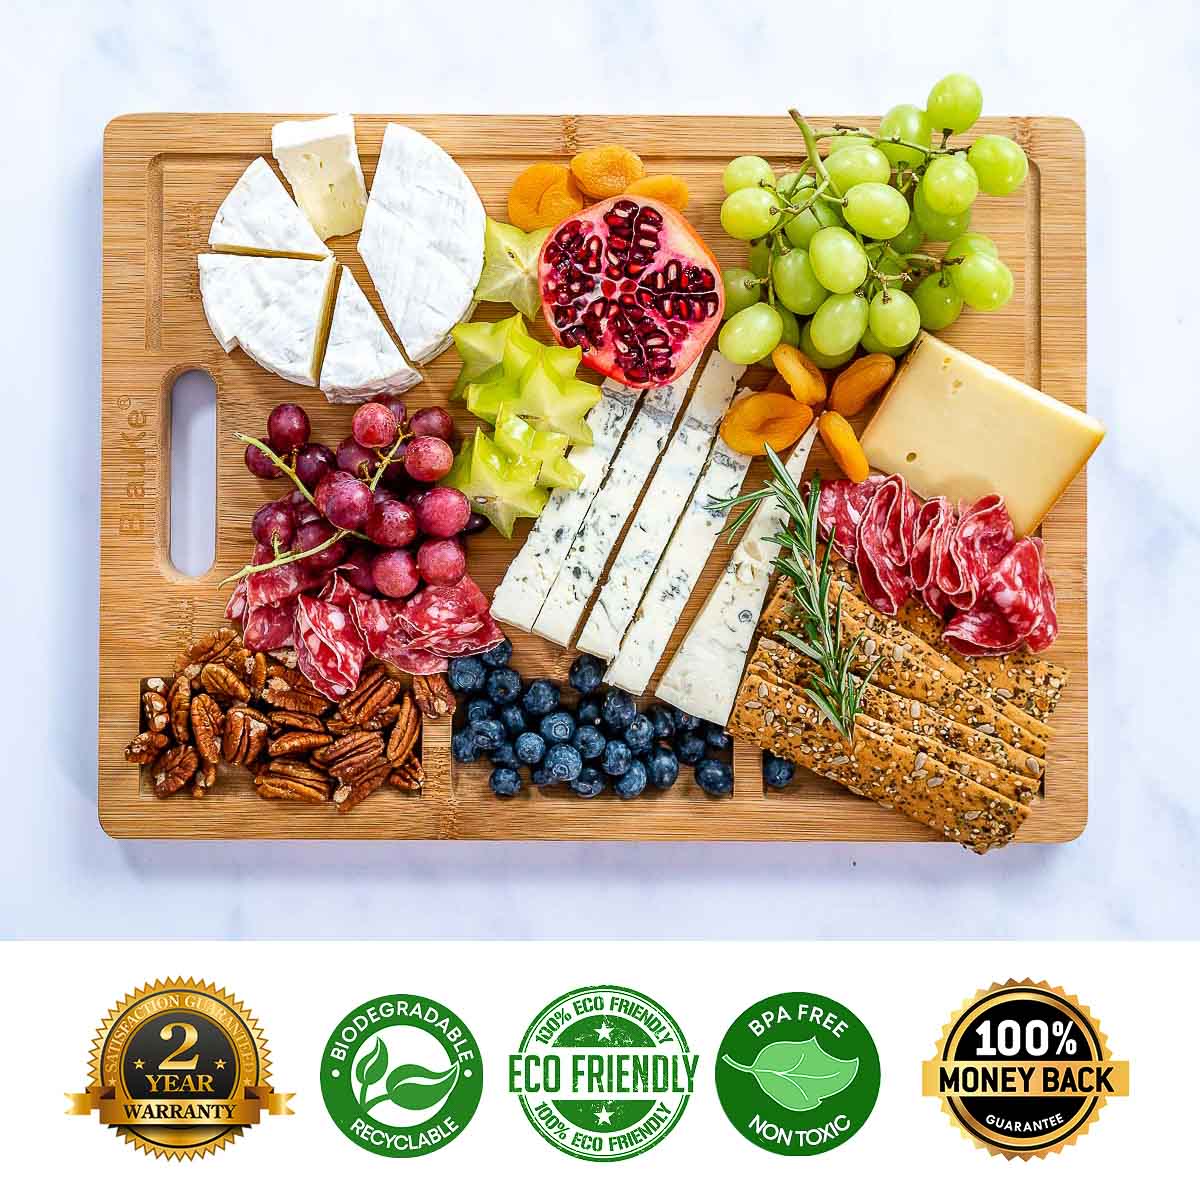 Extra Large Bamboo Cutting Board - 17x12.5 inch Wood Cutting Board for Meat, Cheese, Veggies - Wood Serving Tray with Juice Groove and 3 Compartments-1